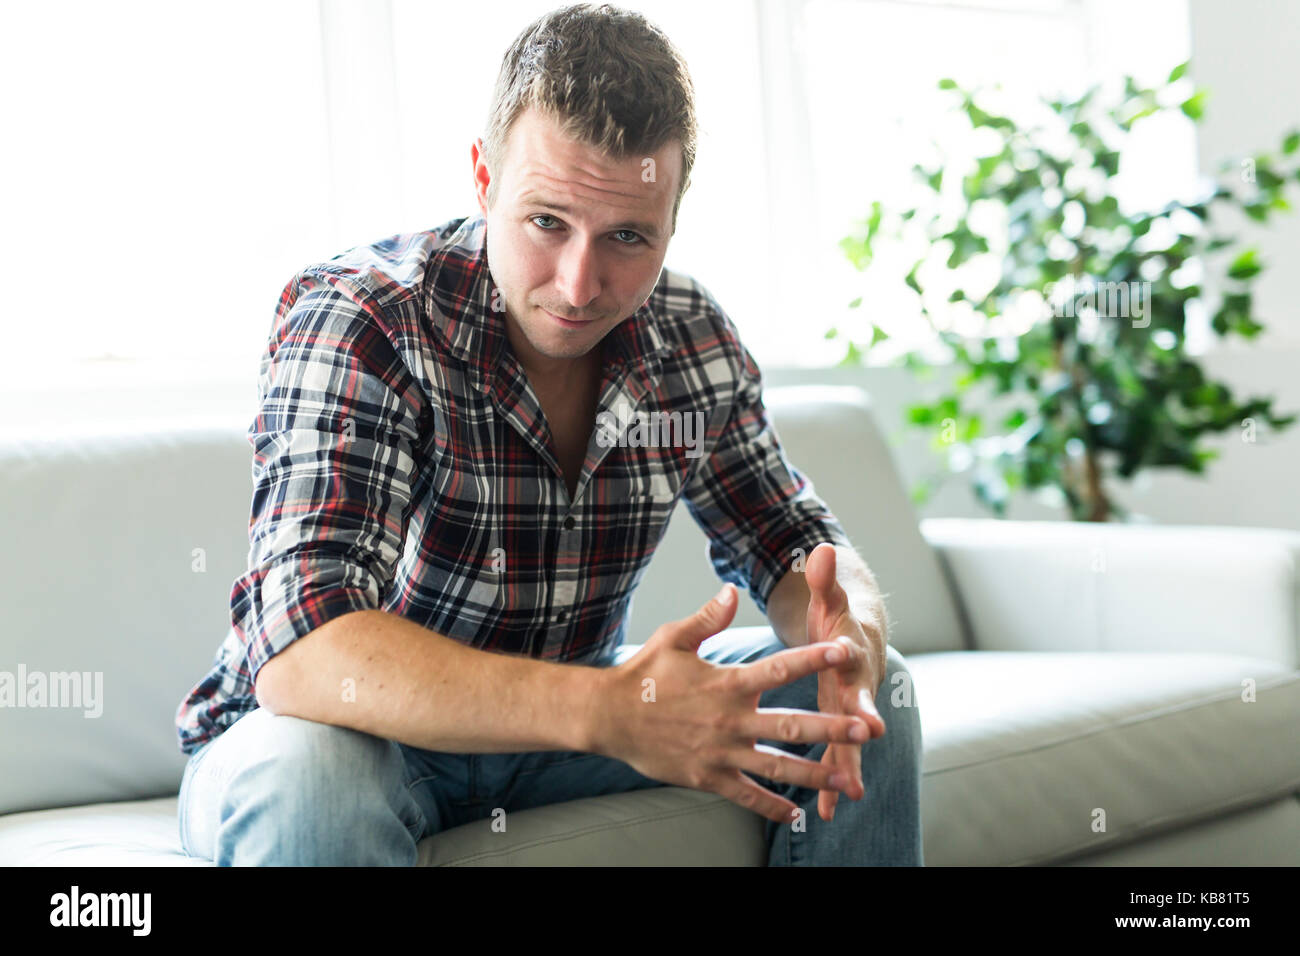 Man sitting in living room Stock Photo